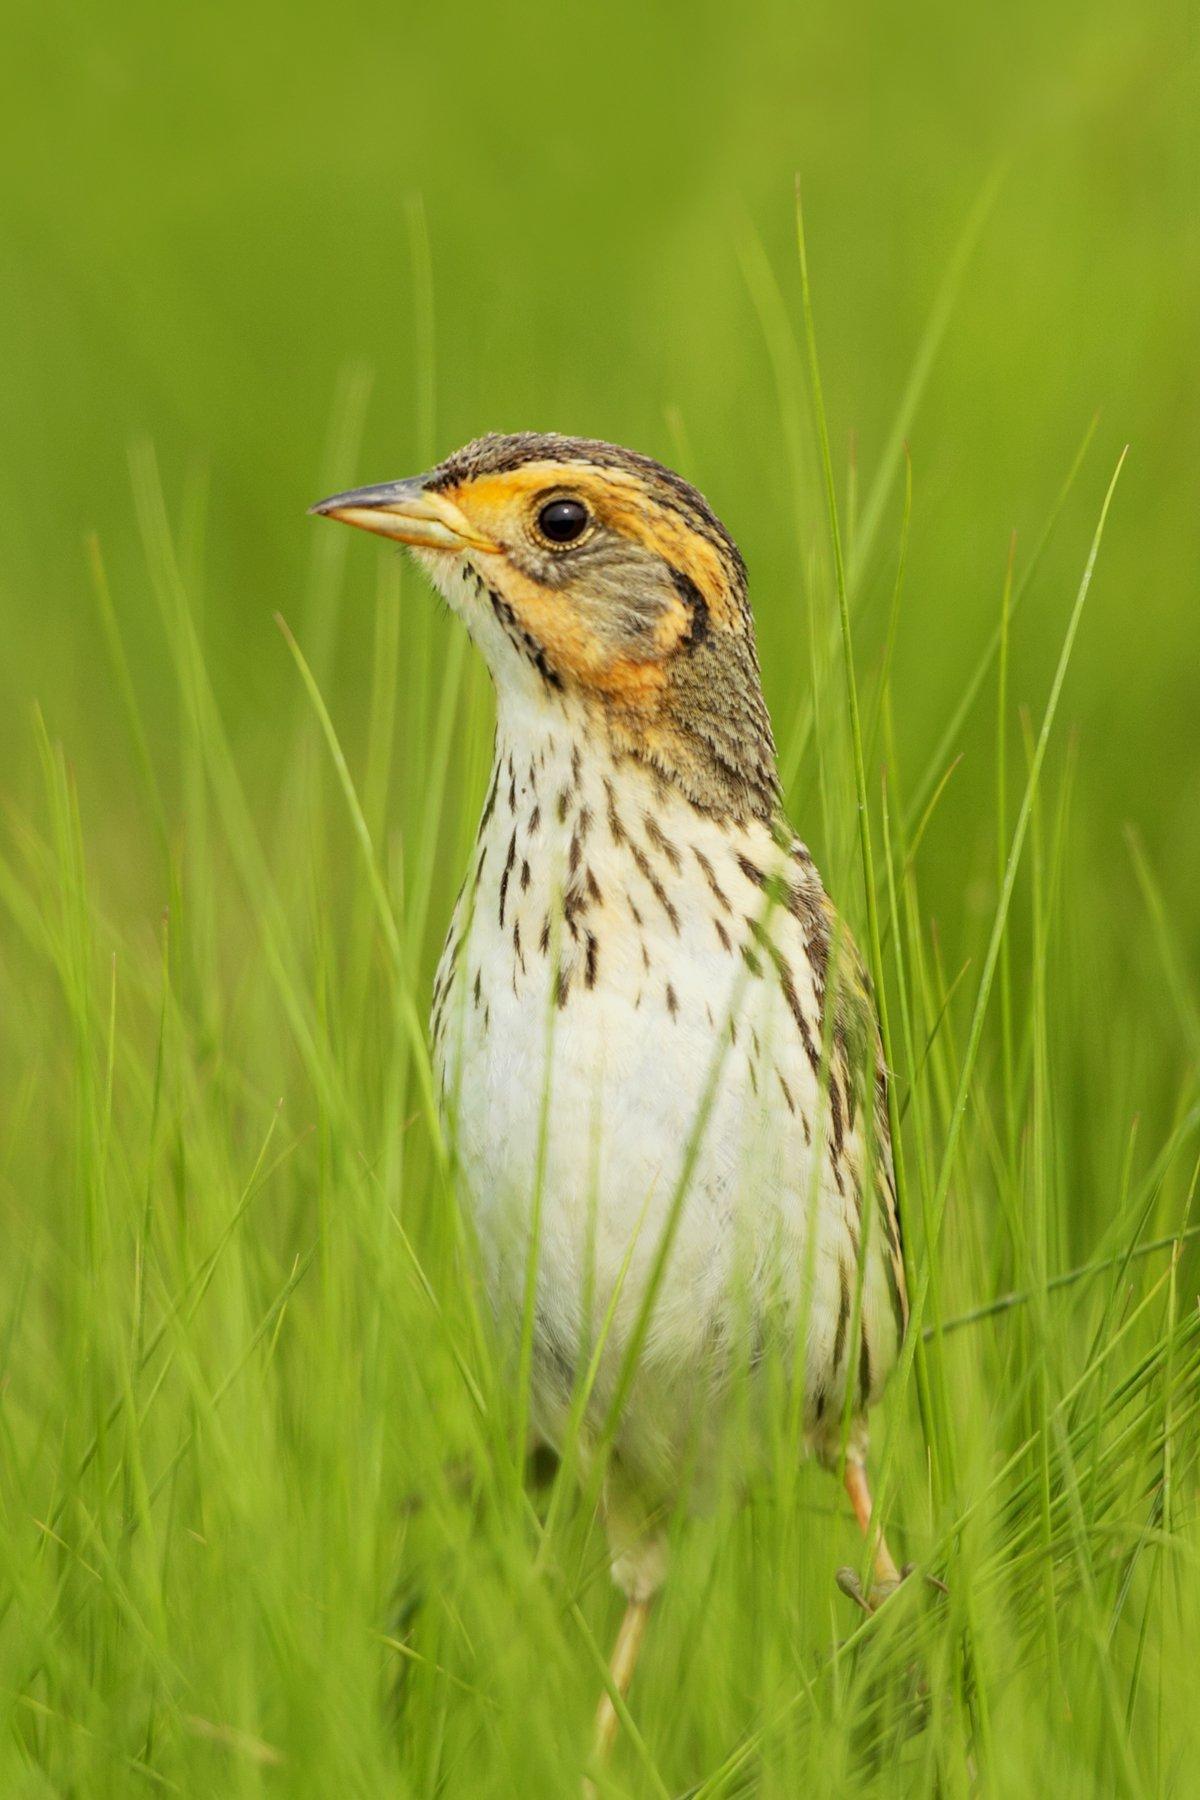 Many State Birds In Decline and One Heading For Extinction